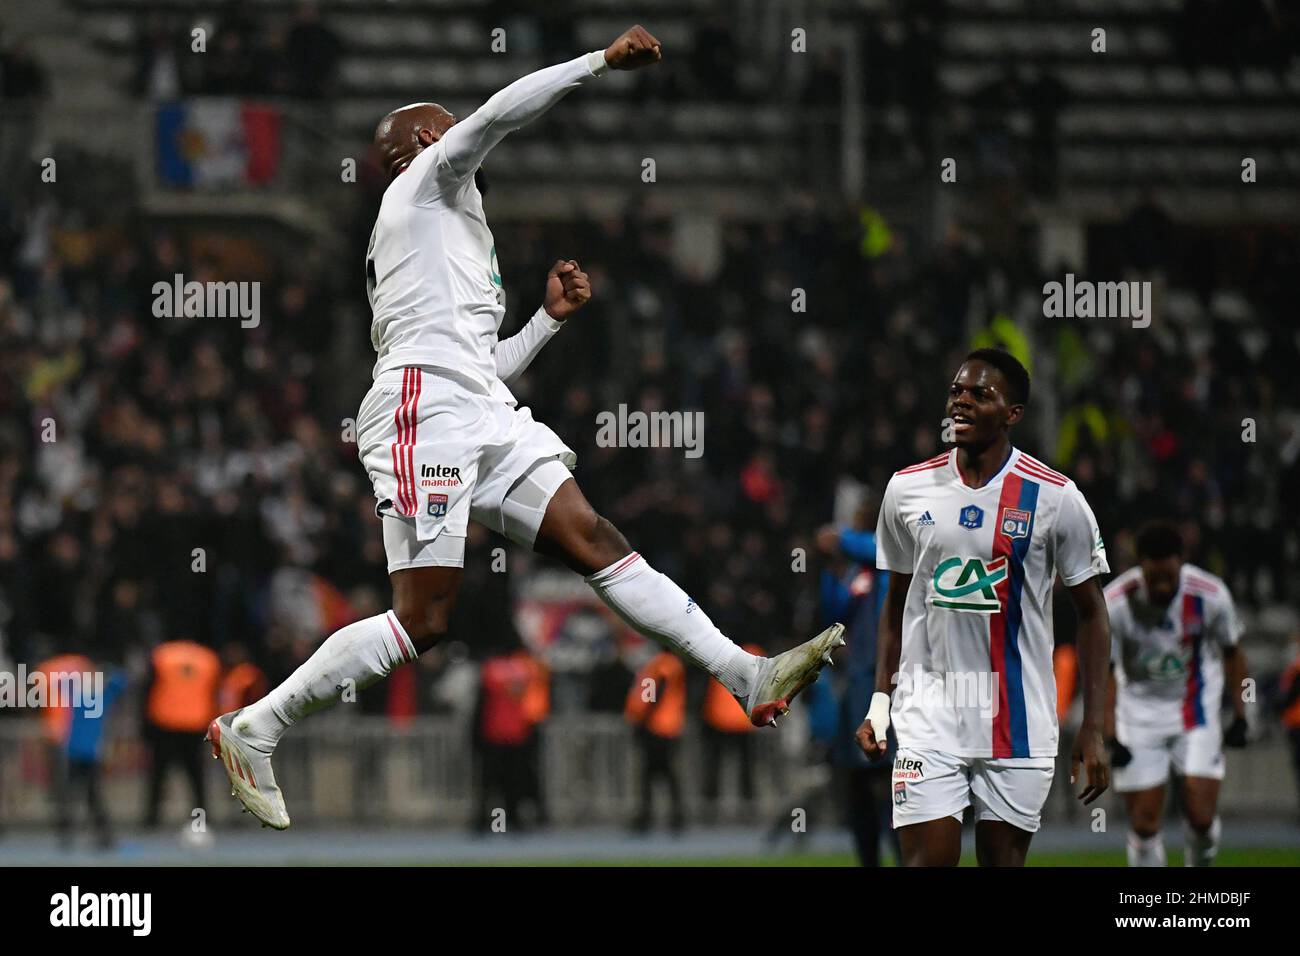 Paris FC - Olympique Lyonnais   Coupe de France, Round of 32 Moussa Dembele's goal during the round of 32 of the French Cup, at the Stade Charlety, be Stock Photo